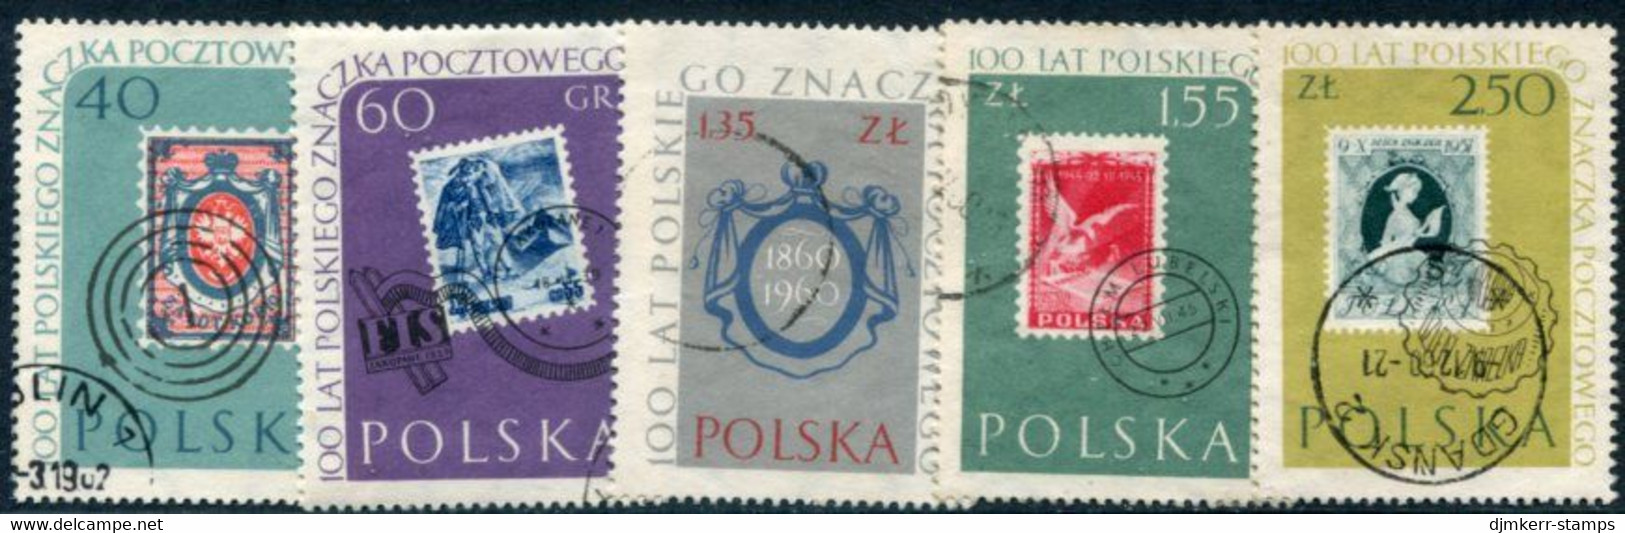 POLAND 1960 Stamp Centenary Set Used.  Michel 1151-55 - Used Stamps